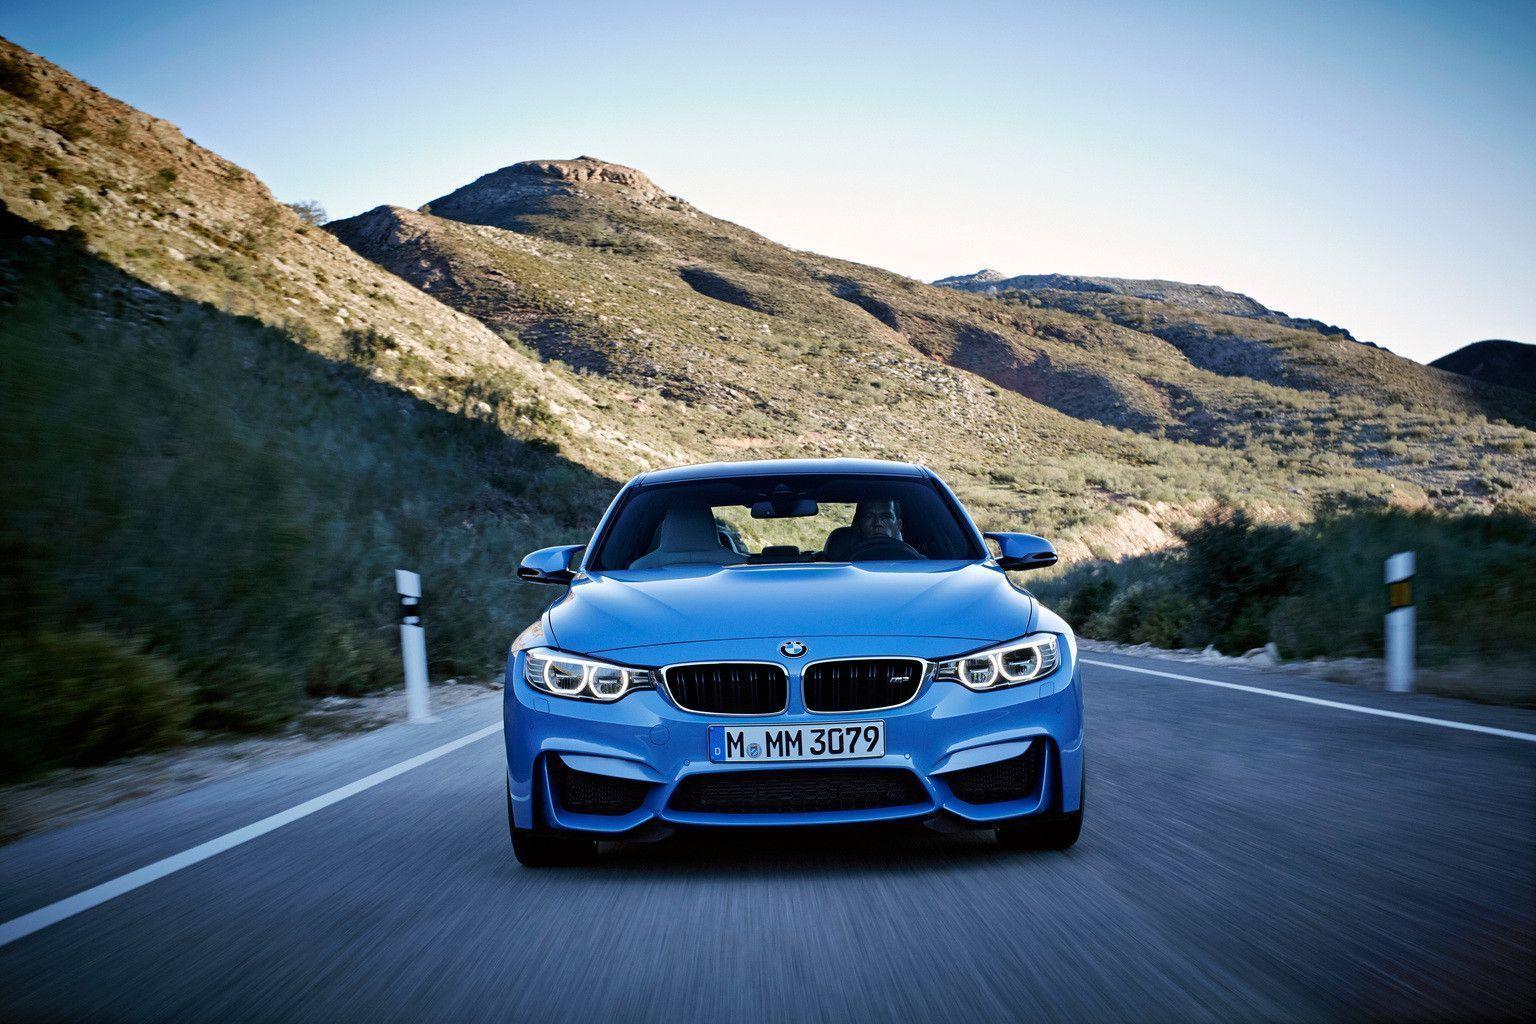 Download Bmw M3 2014 Wallpaper Picture 5 HD Wallpaper Full Size